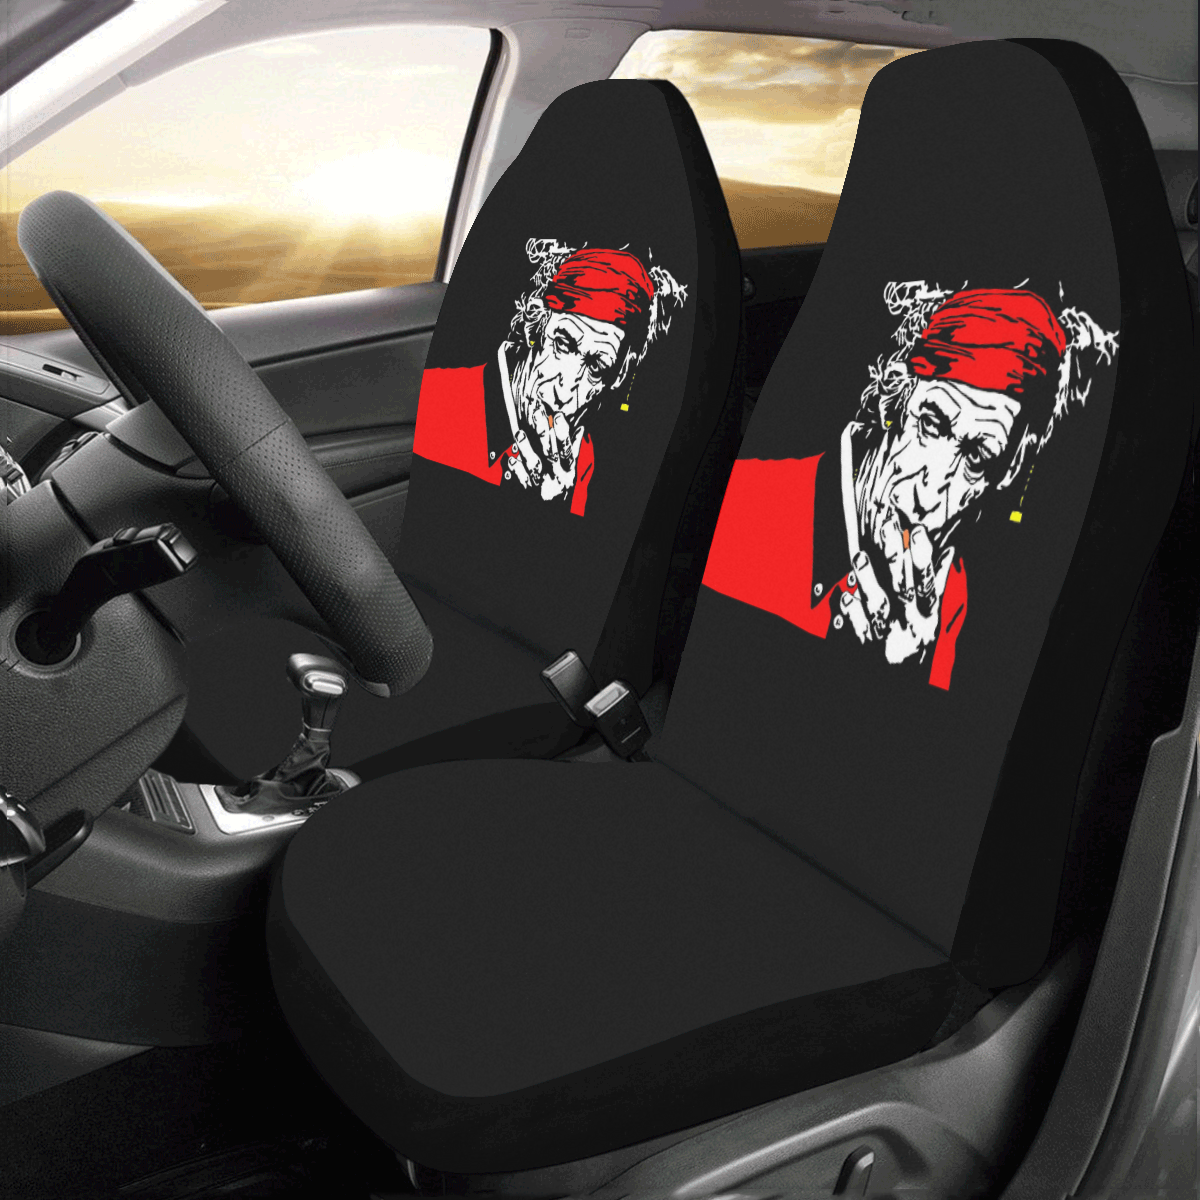 KEITH RICHARDS- Car Seat Covers (Set of 2)